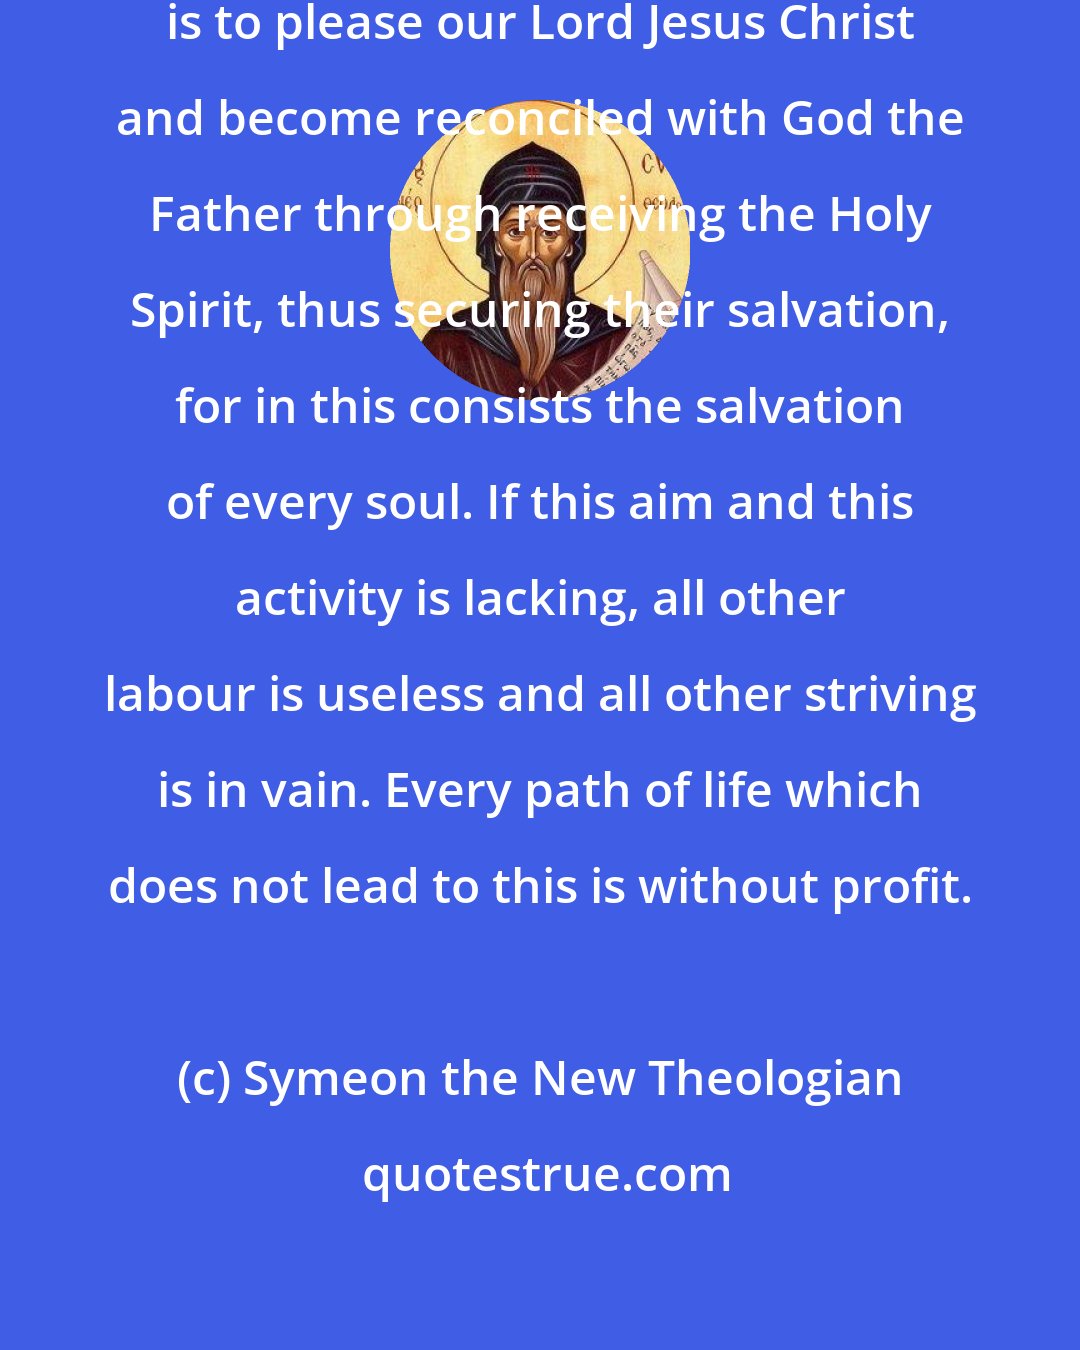 Symeon the New Theologian: The aim of all those who live in God is to please our Lord Jesus Christ and become reconciled with God the Father through receiving the Holy Spirit, thus securing their salvation, for in this consists the salvation of every soul. If this aim and this activity is lacking, all other labour is useless and all other striving is in vain. Every path of life which does not lead to this is without profit.